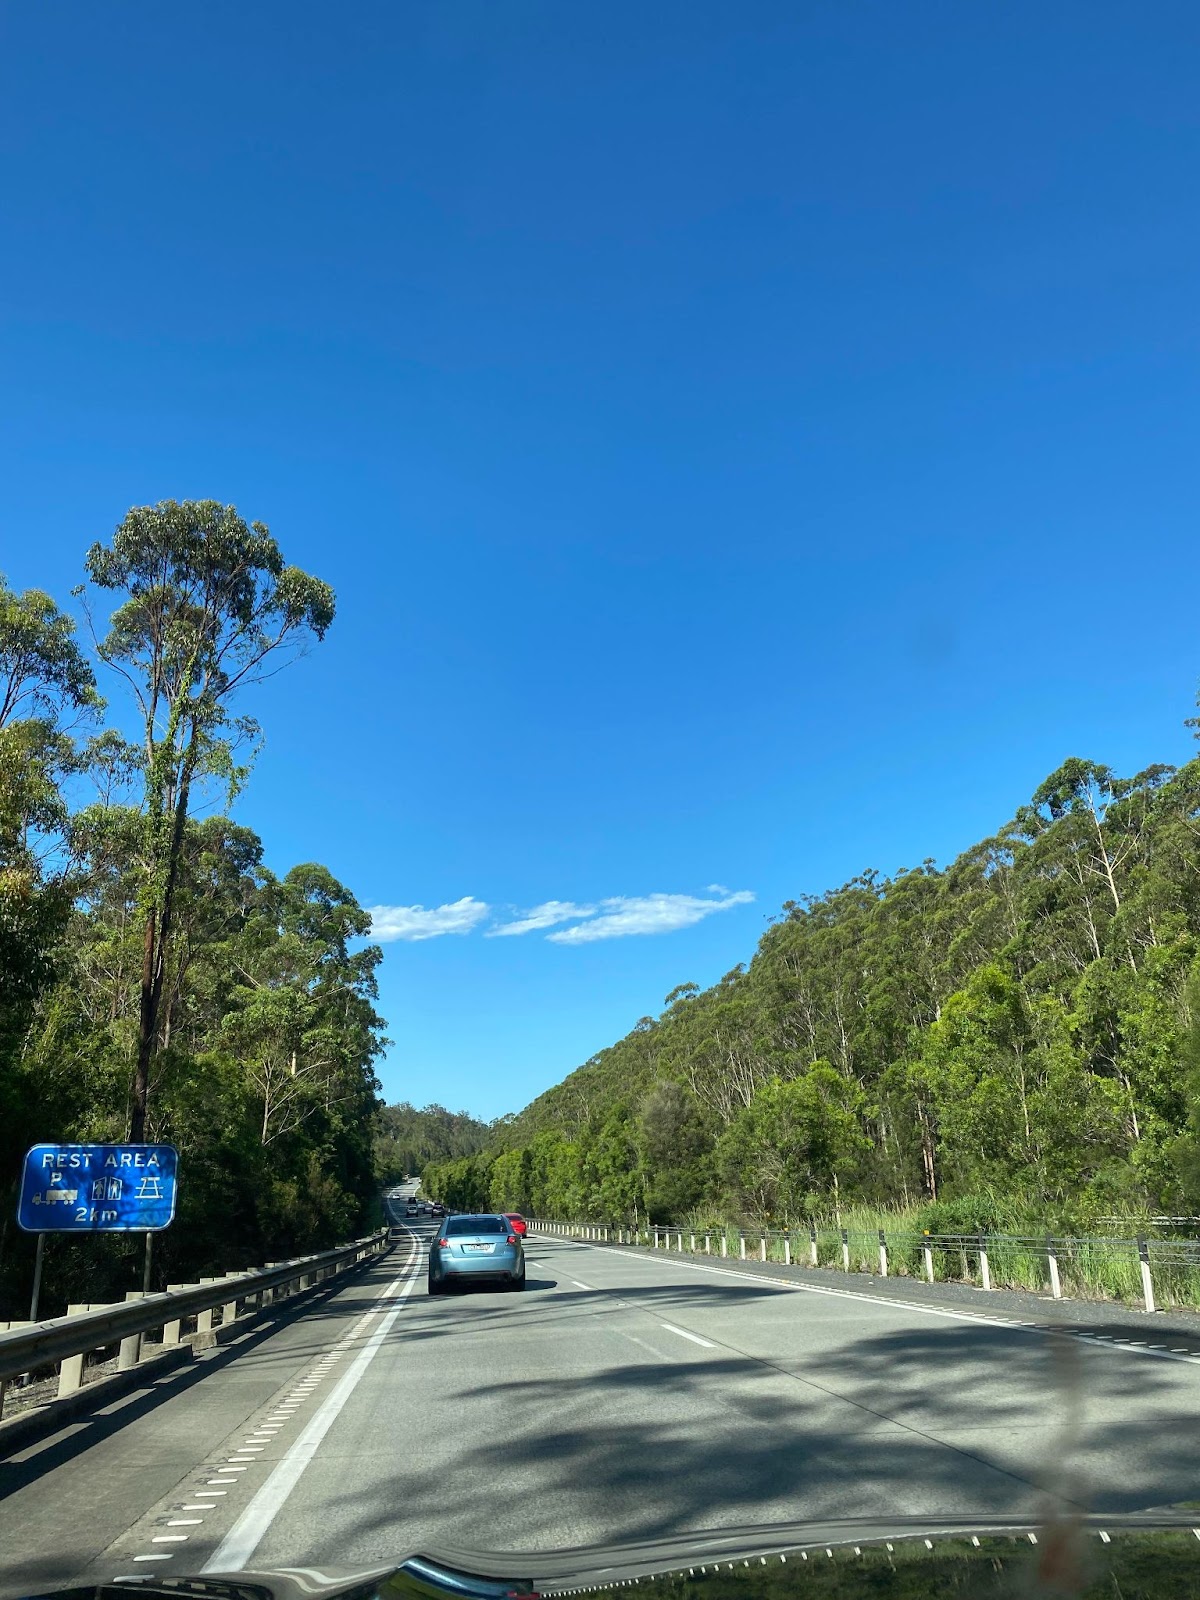 Car hire roadtrip from Sydney